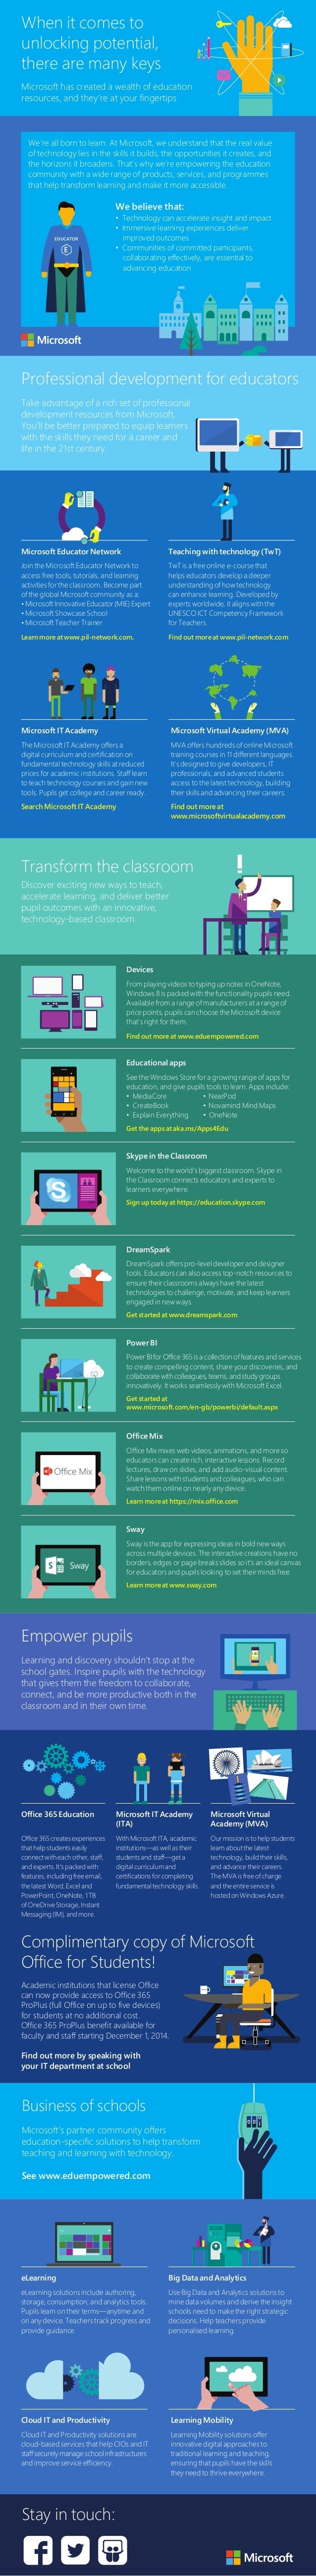 Microsoft in Education Infographic - e-Learning Infographics